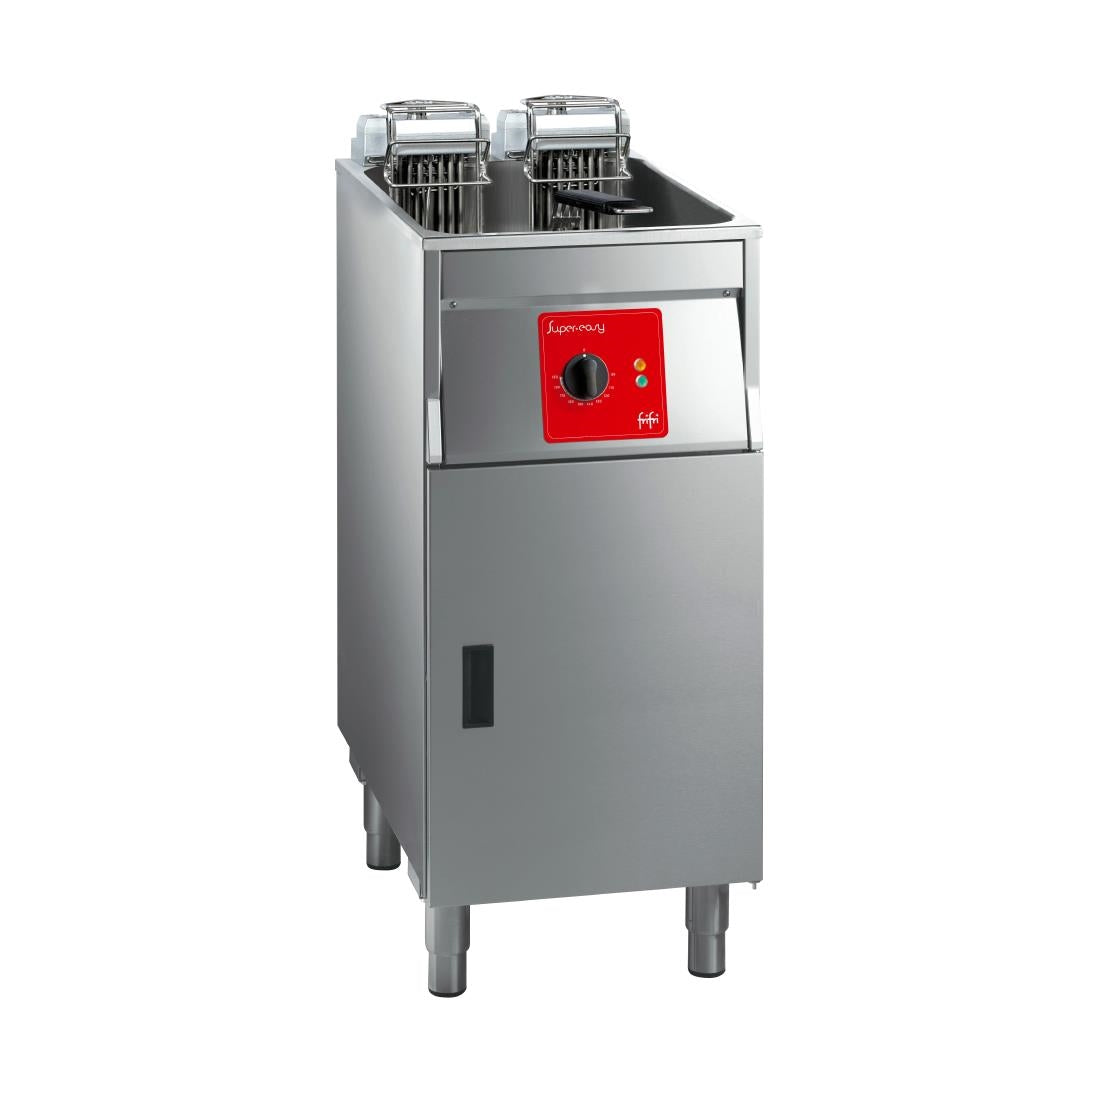 HS057-3PH FriFri Super Easy 411 Electric Free-Standing Single Tank Fryer without Filtration 1 Basket 15kW - Three Phase